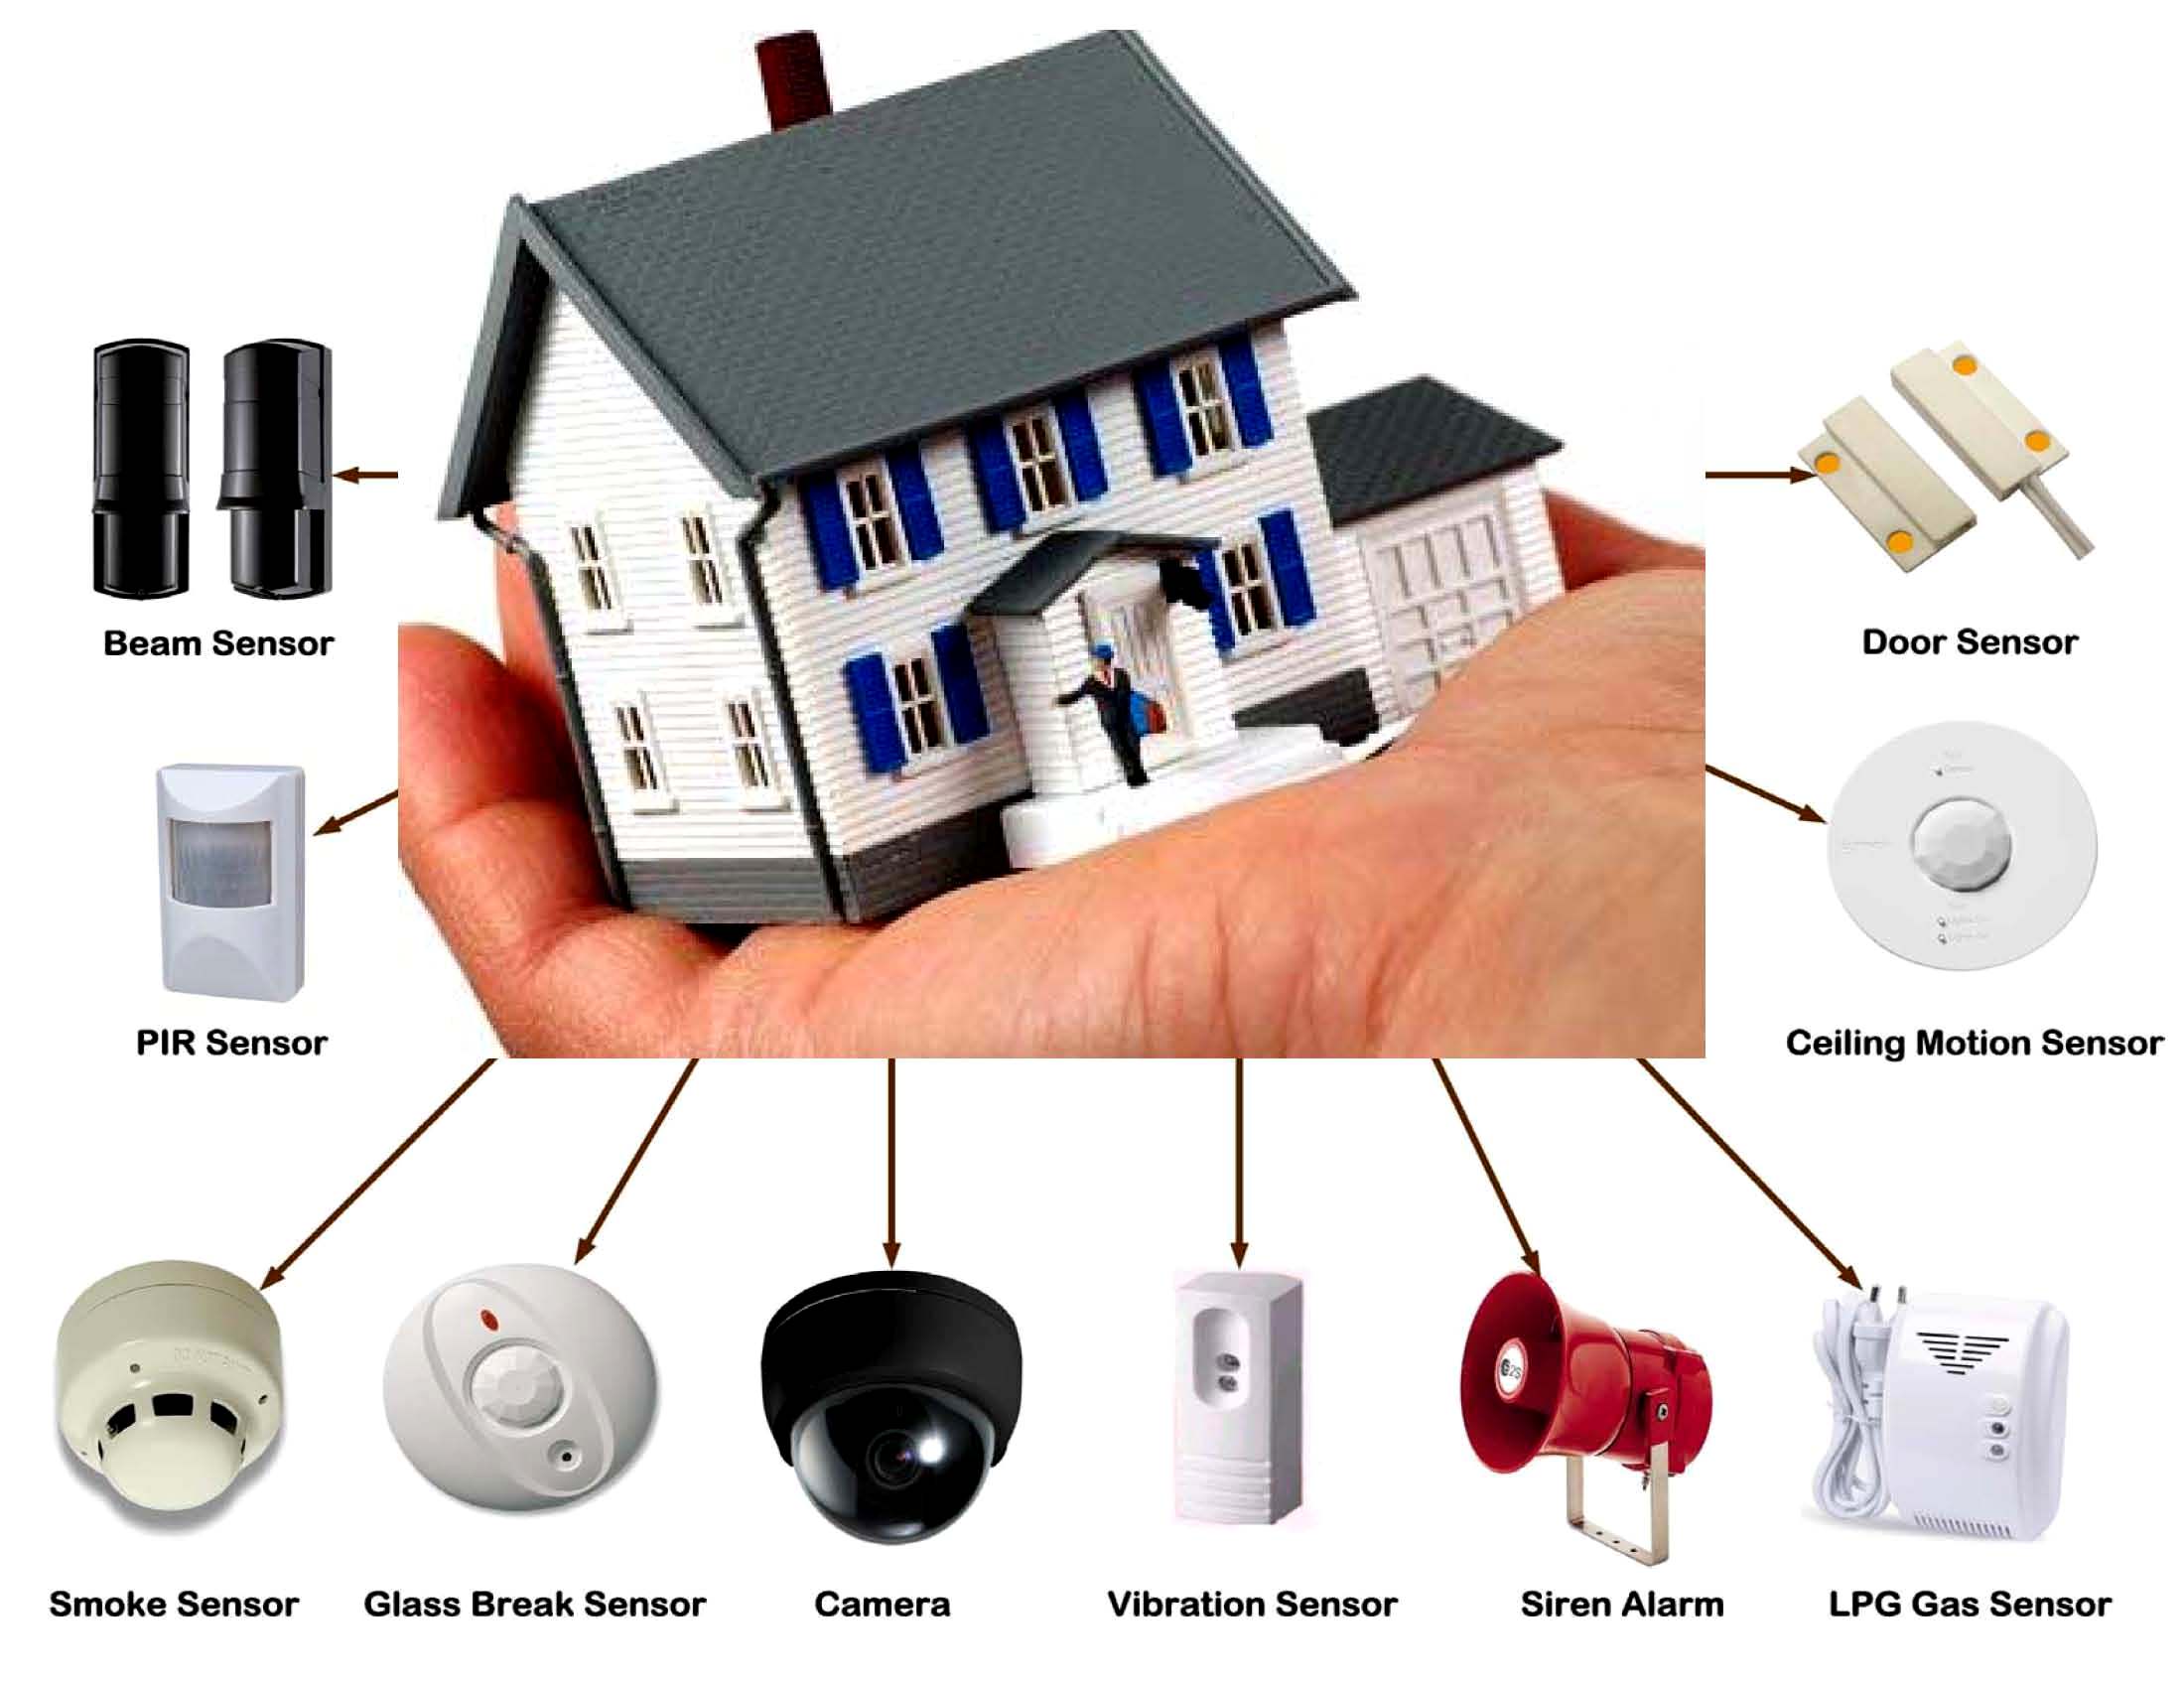 Some Of The Best Home Security Alarm Systems | Home Alarm System